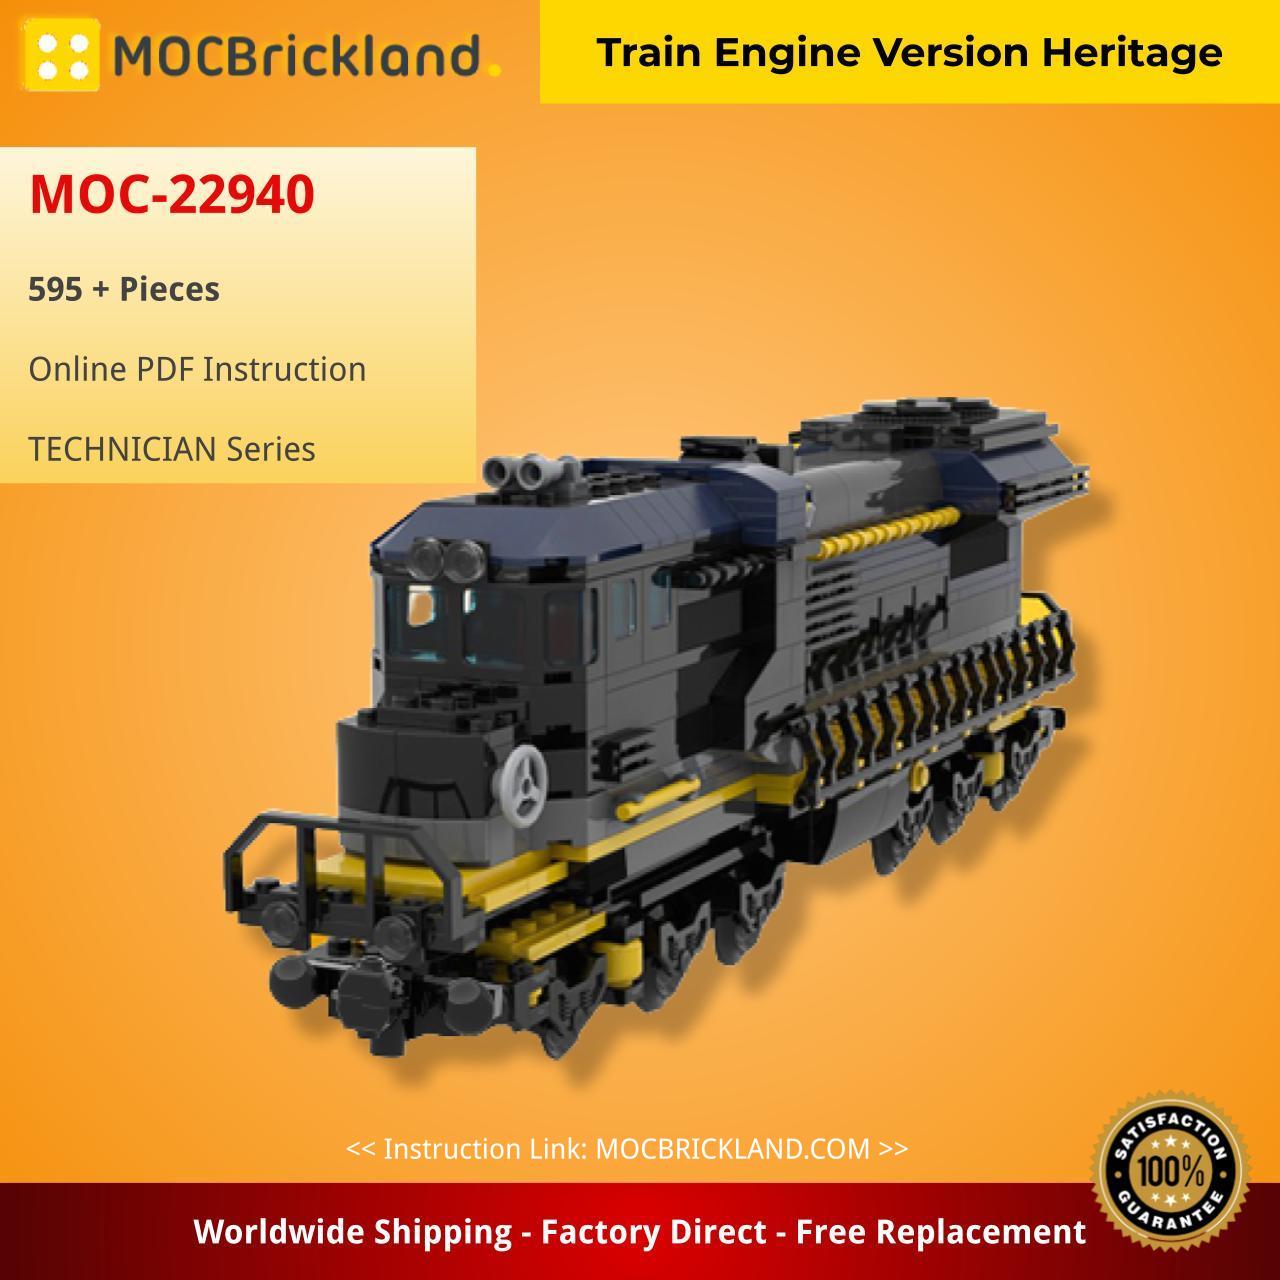 TECHNICIAN MOC-22940 Train Engine Version Heritage by MocLife MOCBRICKLAND